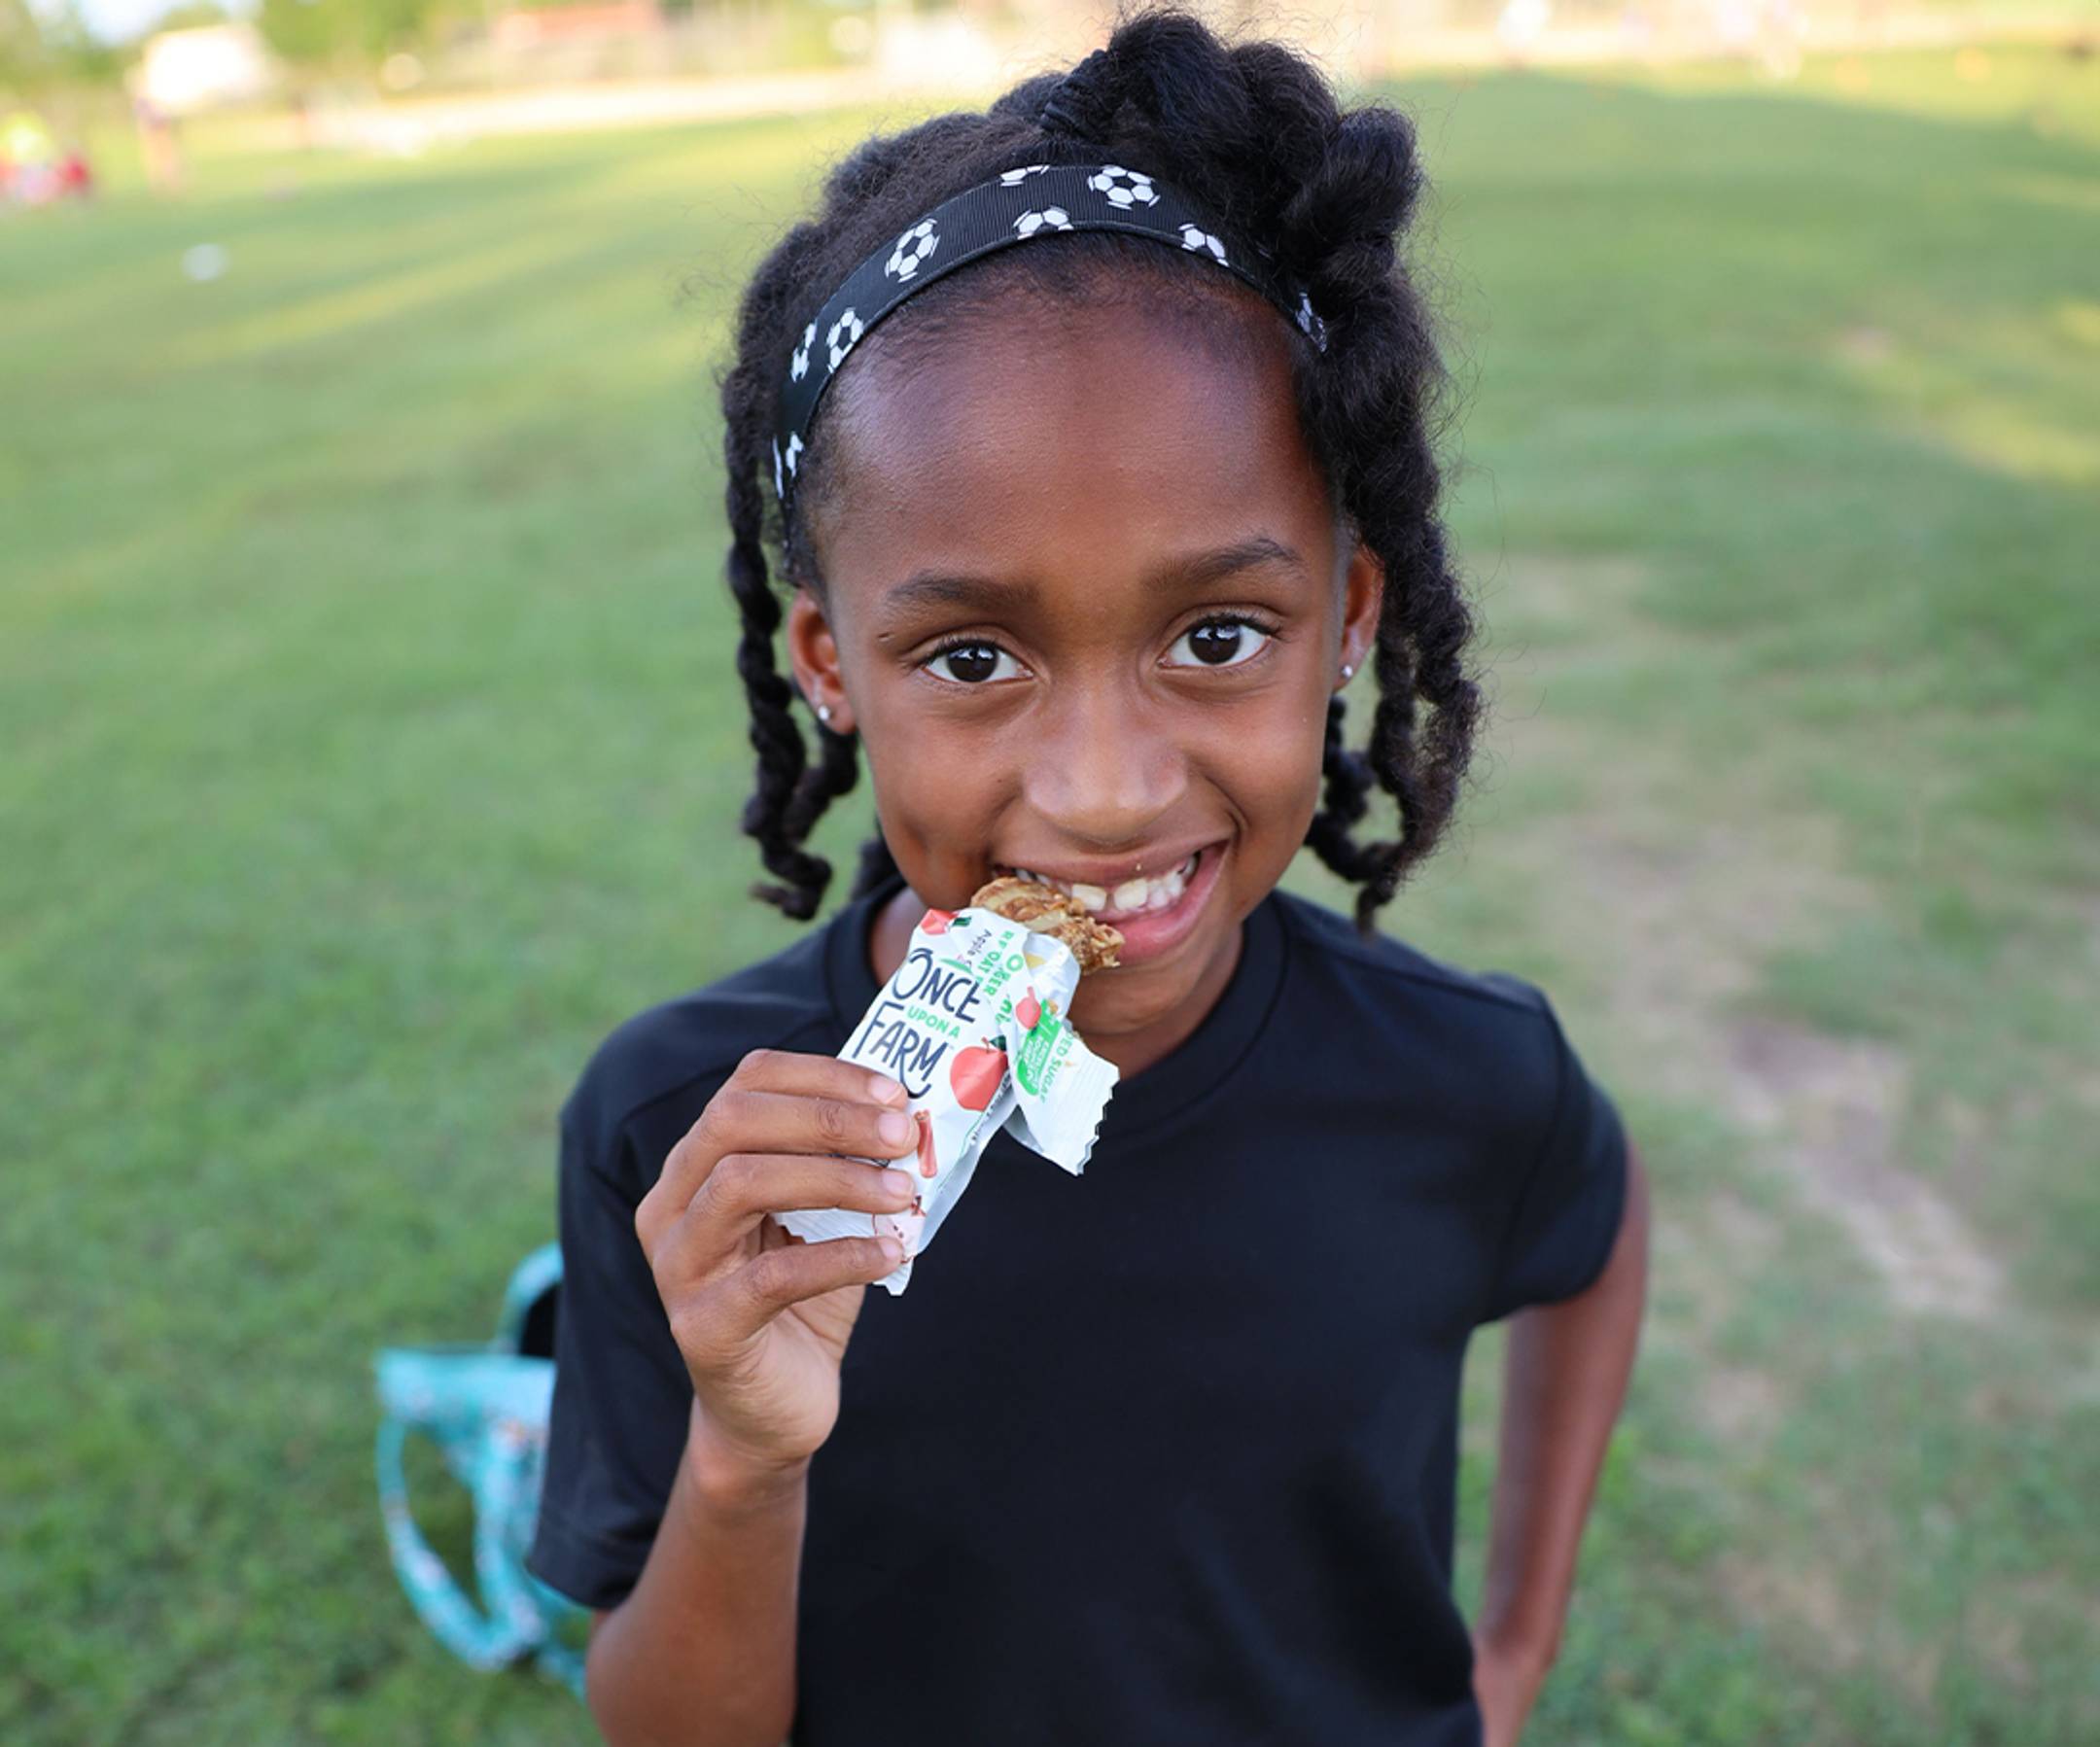 photo of a young girl eating a refrigerated oat bar before sports practice